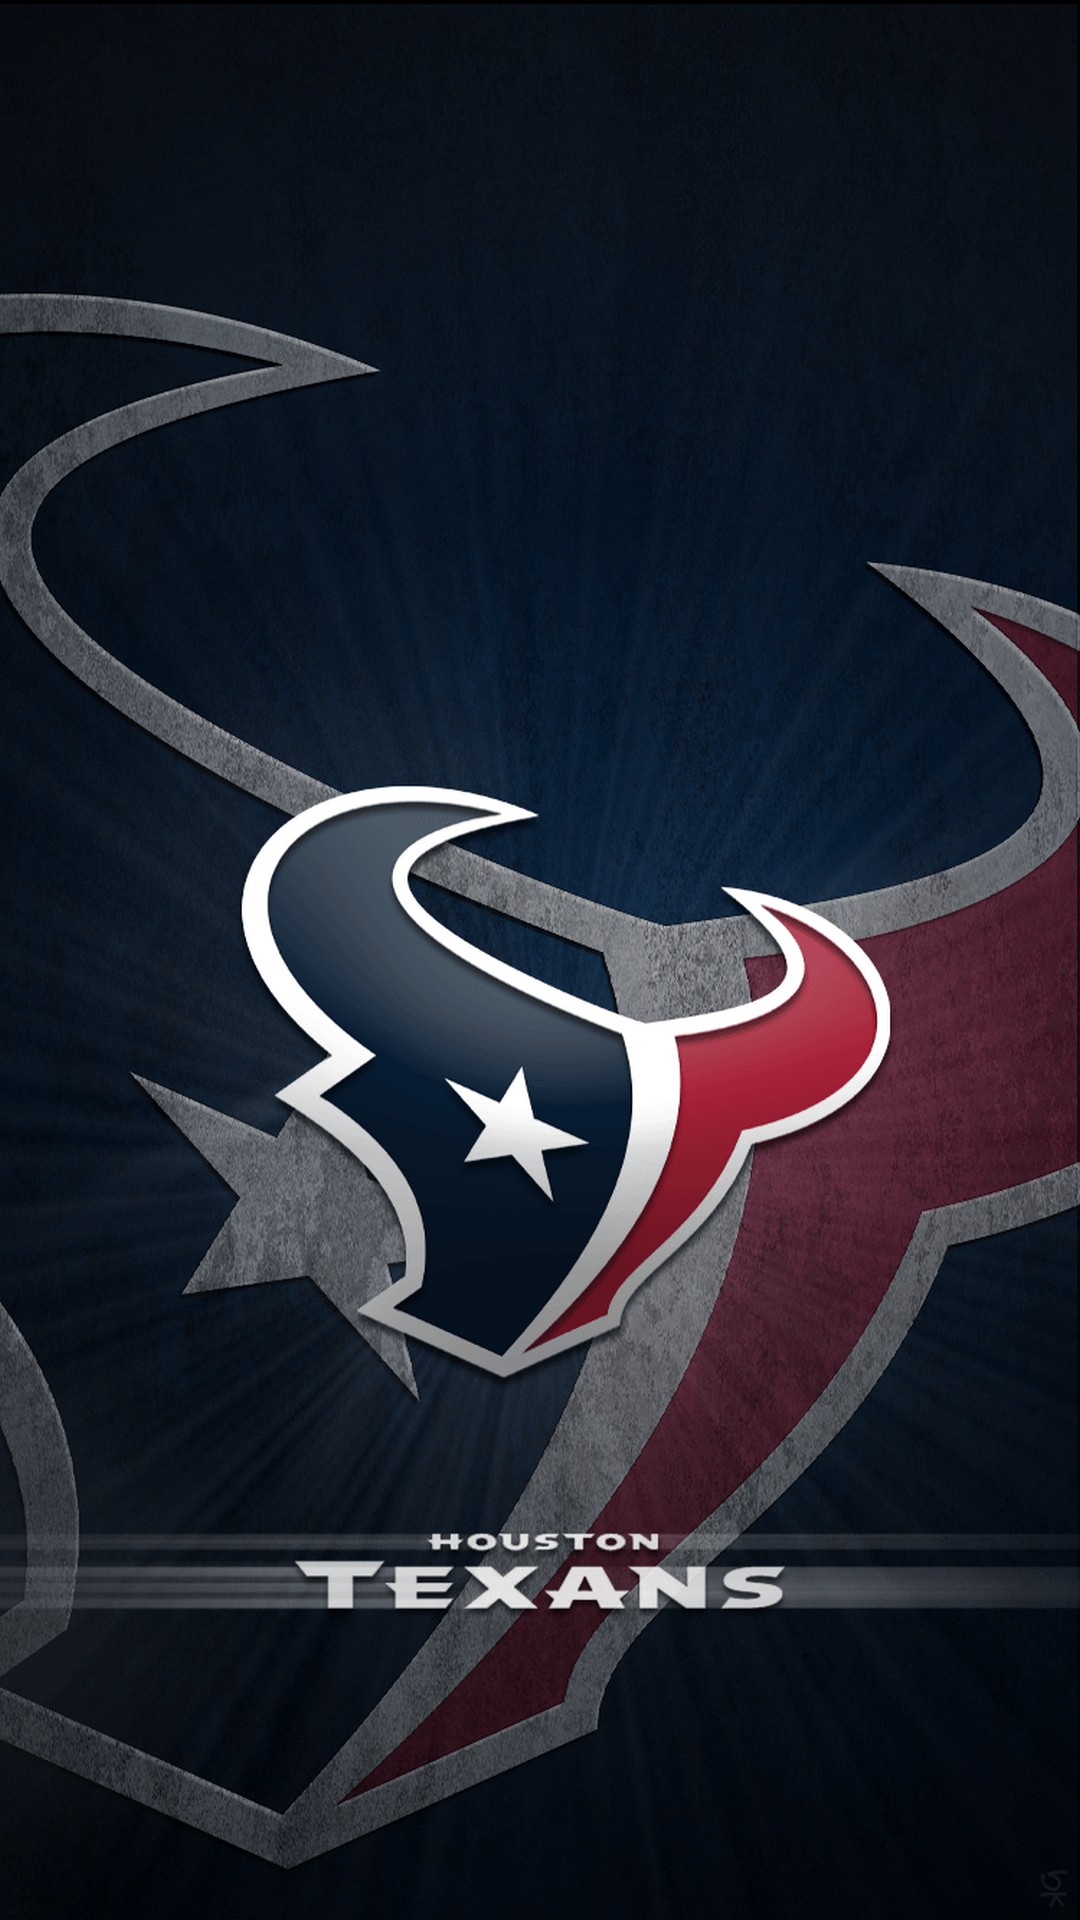 Houston Texans iPhone 7 Plus Wallpaper with high-resolution 1080x1920 pixel. Download and set as wallpaper for Apple iPhone X, XS Max, XR, 8, 7, 6, SE, iPad, Android